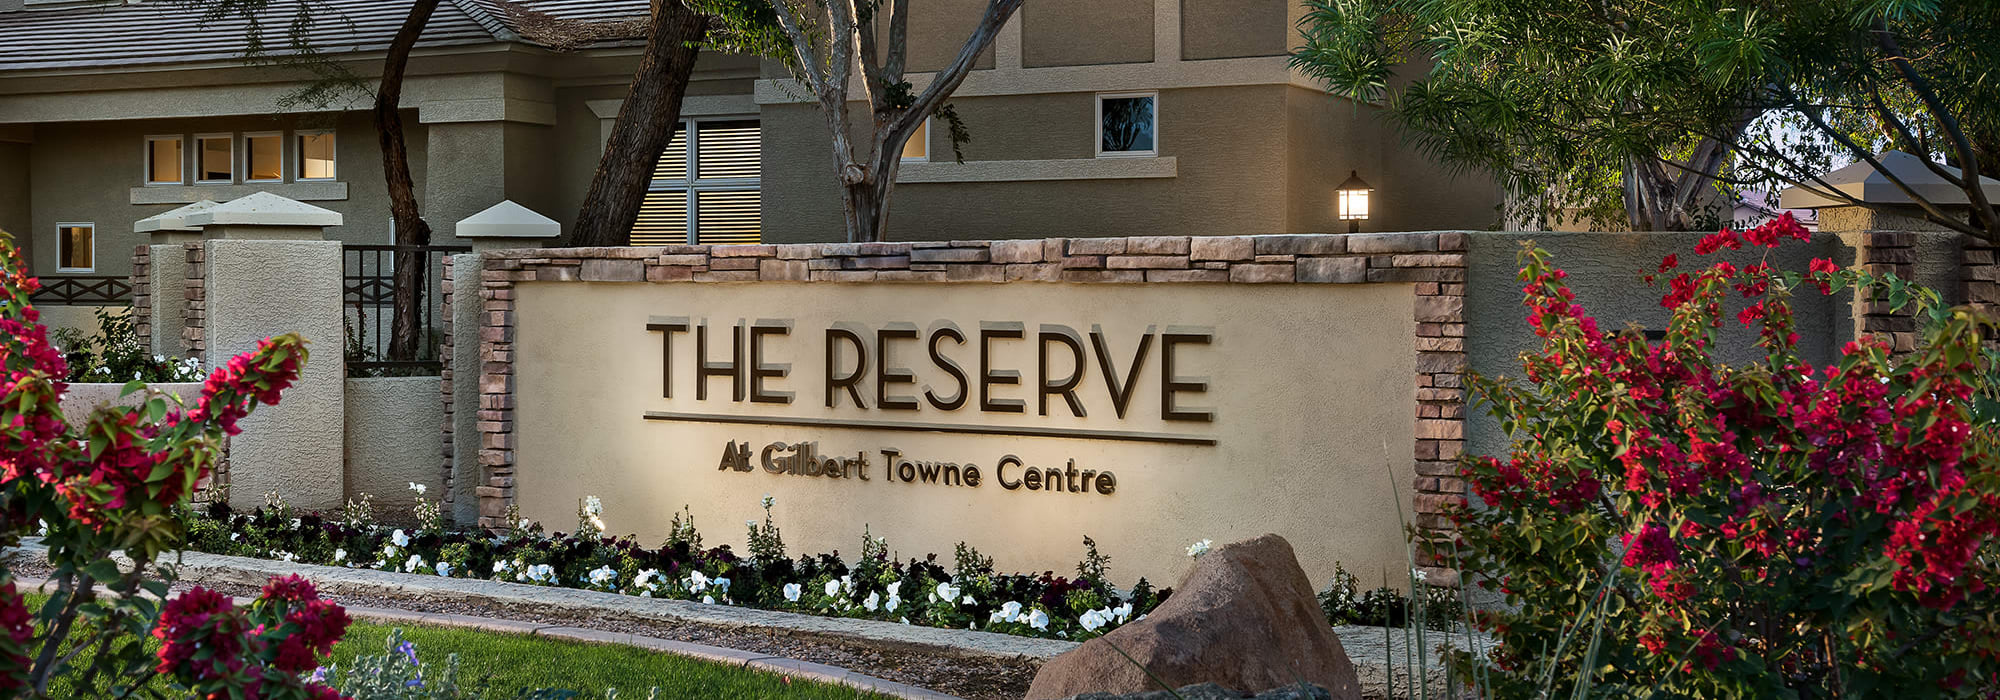 Entrance to The Reserve at Gilbert Towne Centre in Gilbert, Arizona